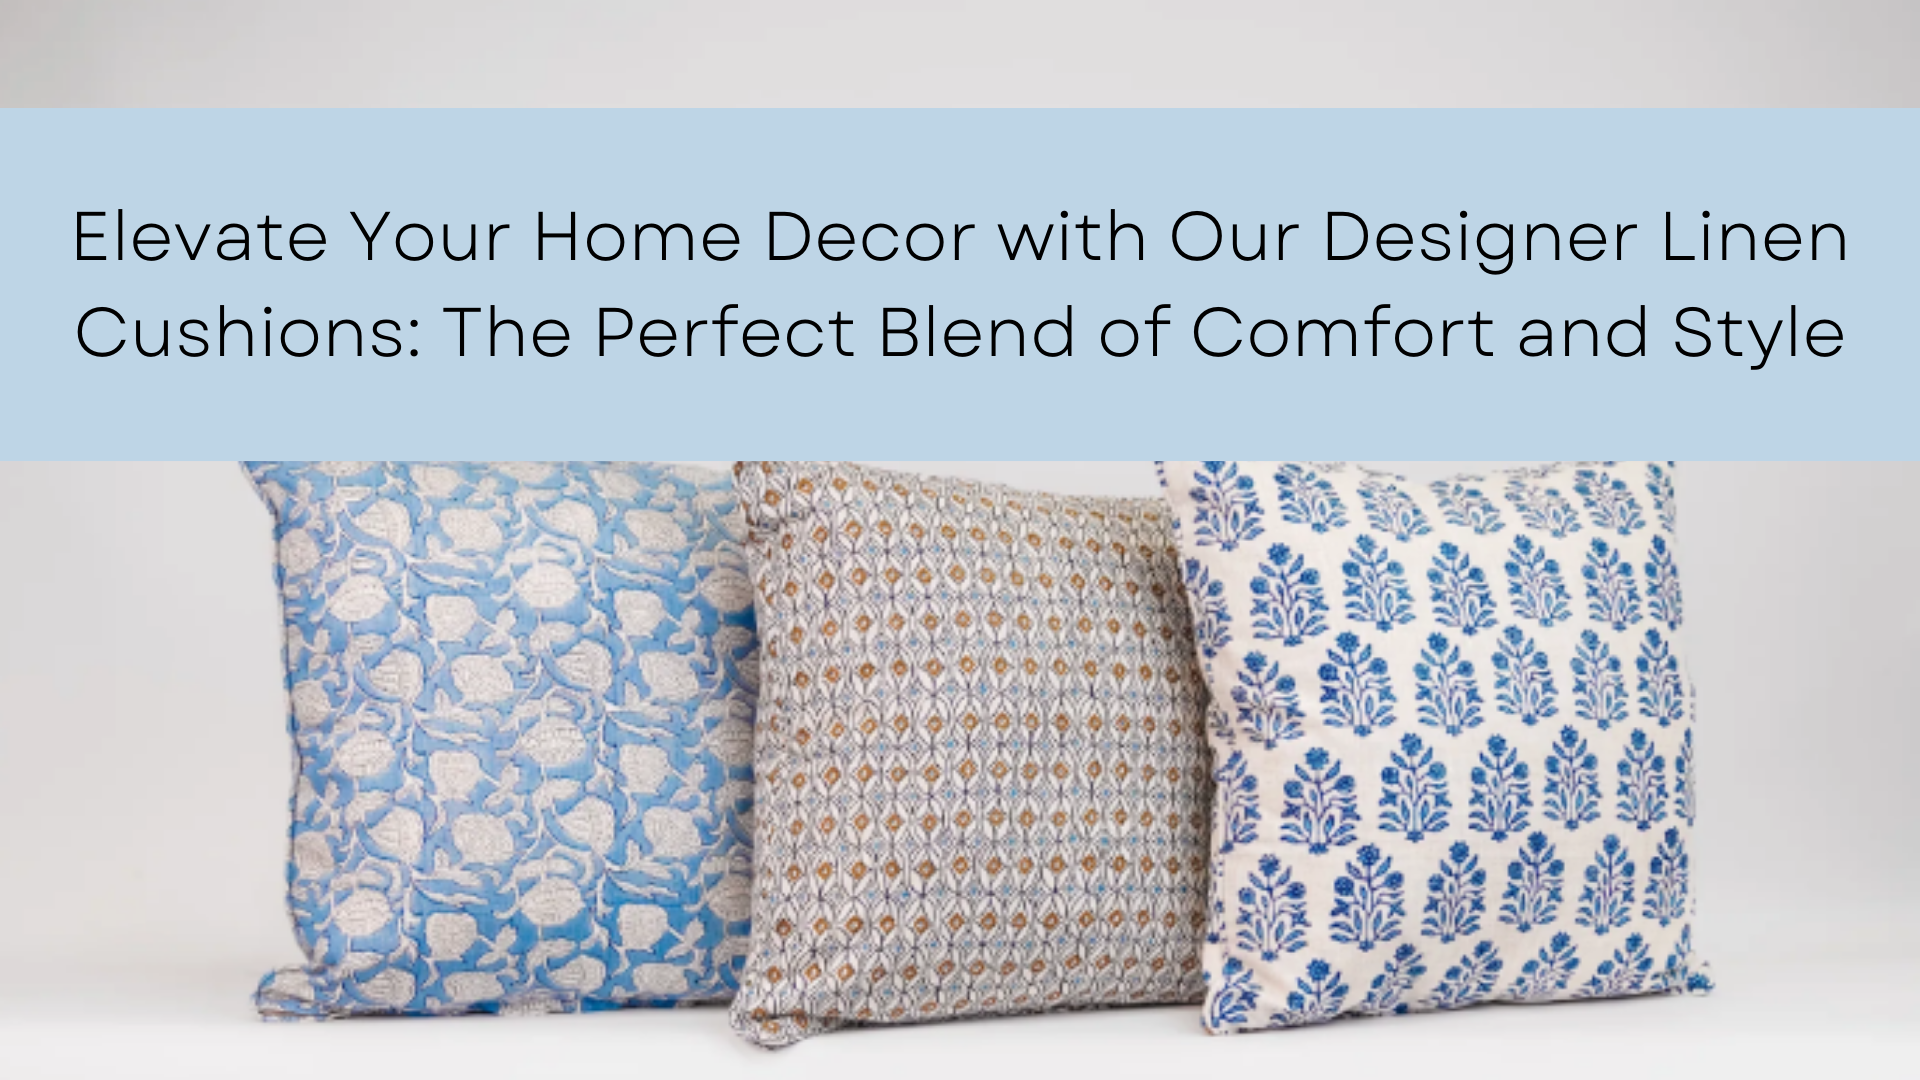 Elevate Your Home Decor with Our Designer Linen Cushions: The Perfect Blend of Comfort and Style